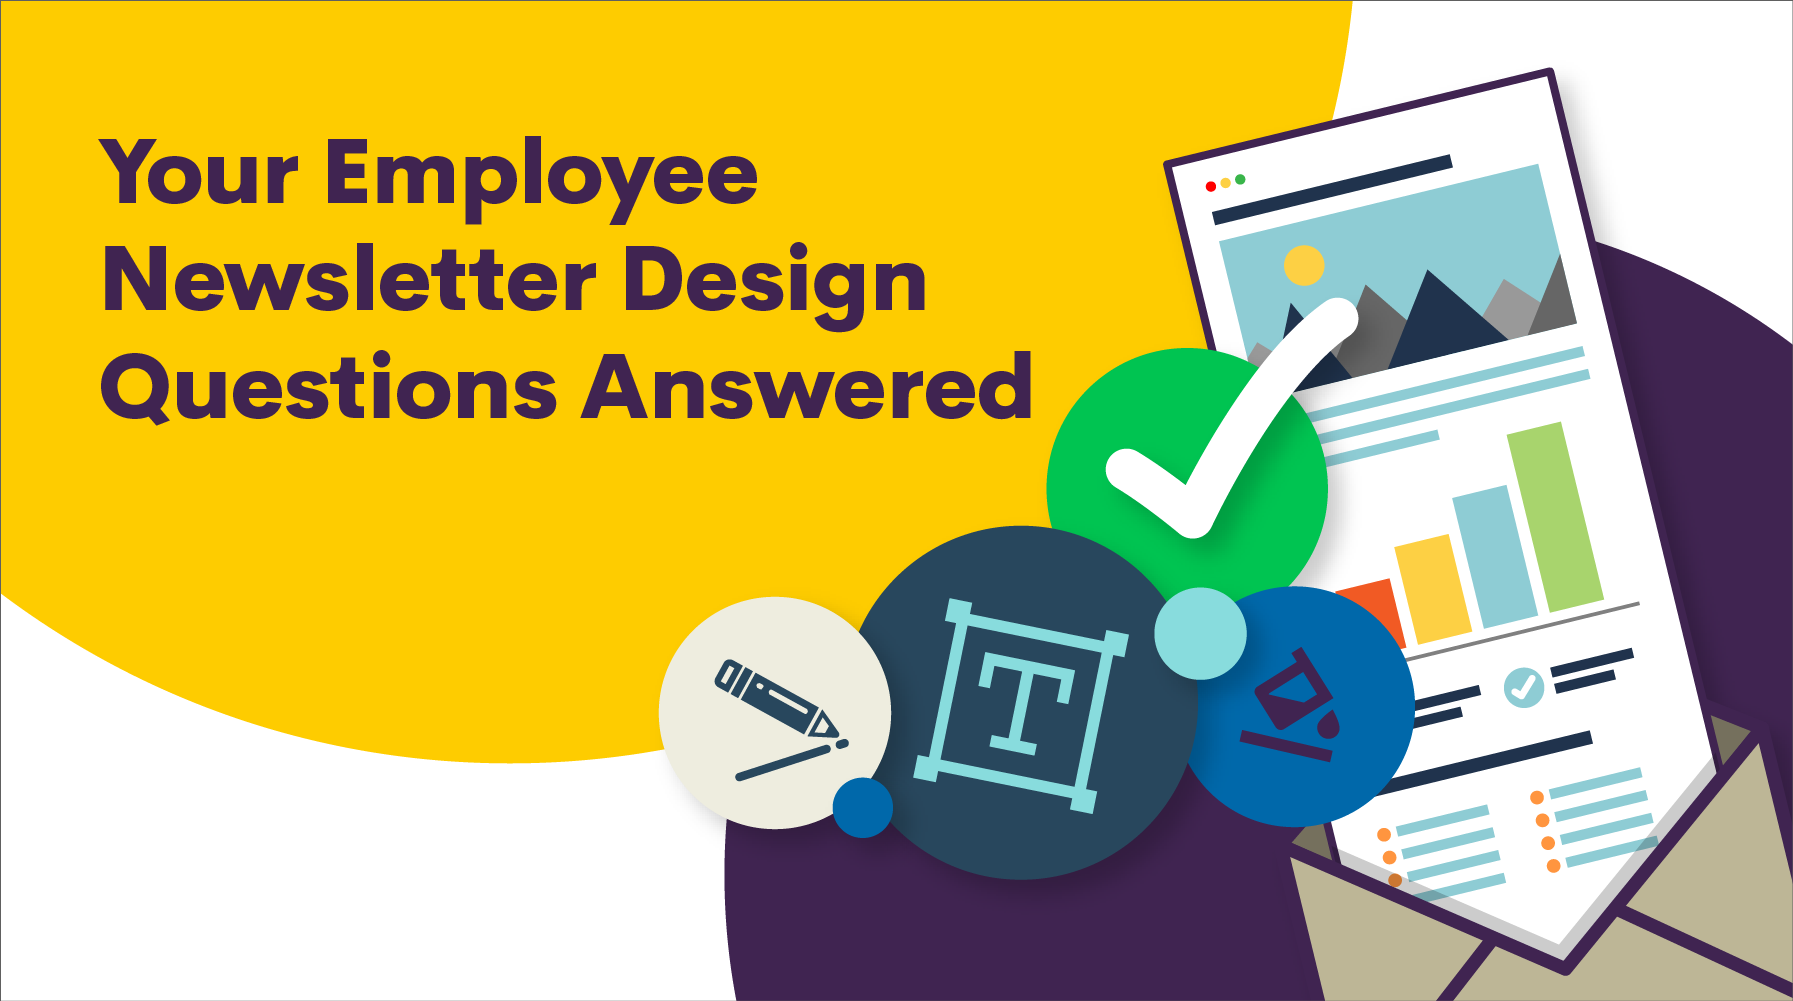 All of Your Employee Newsletter Design Questions Answered